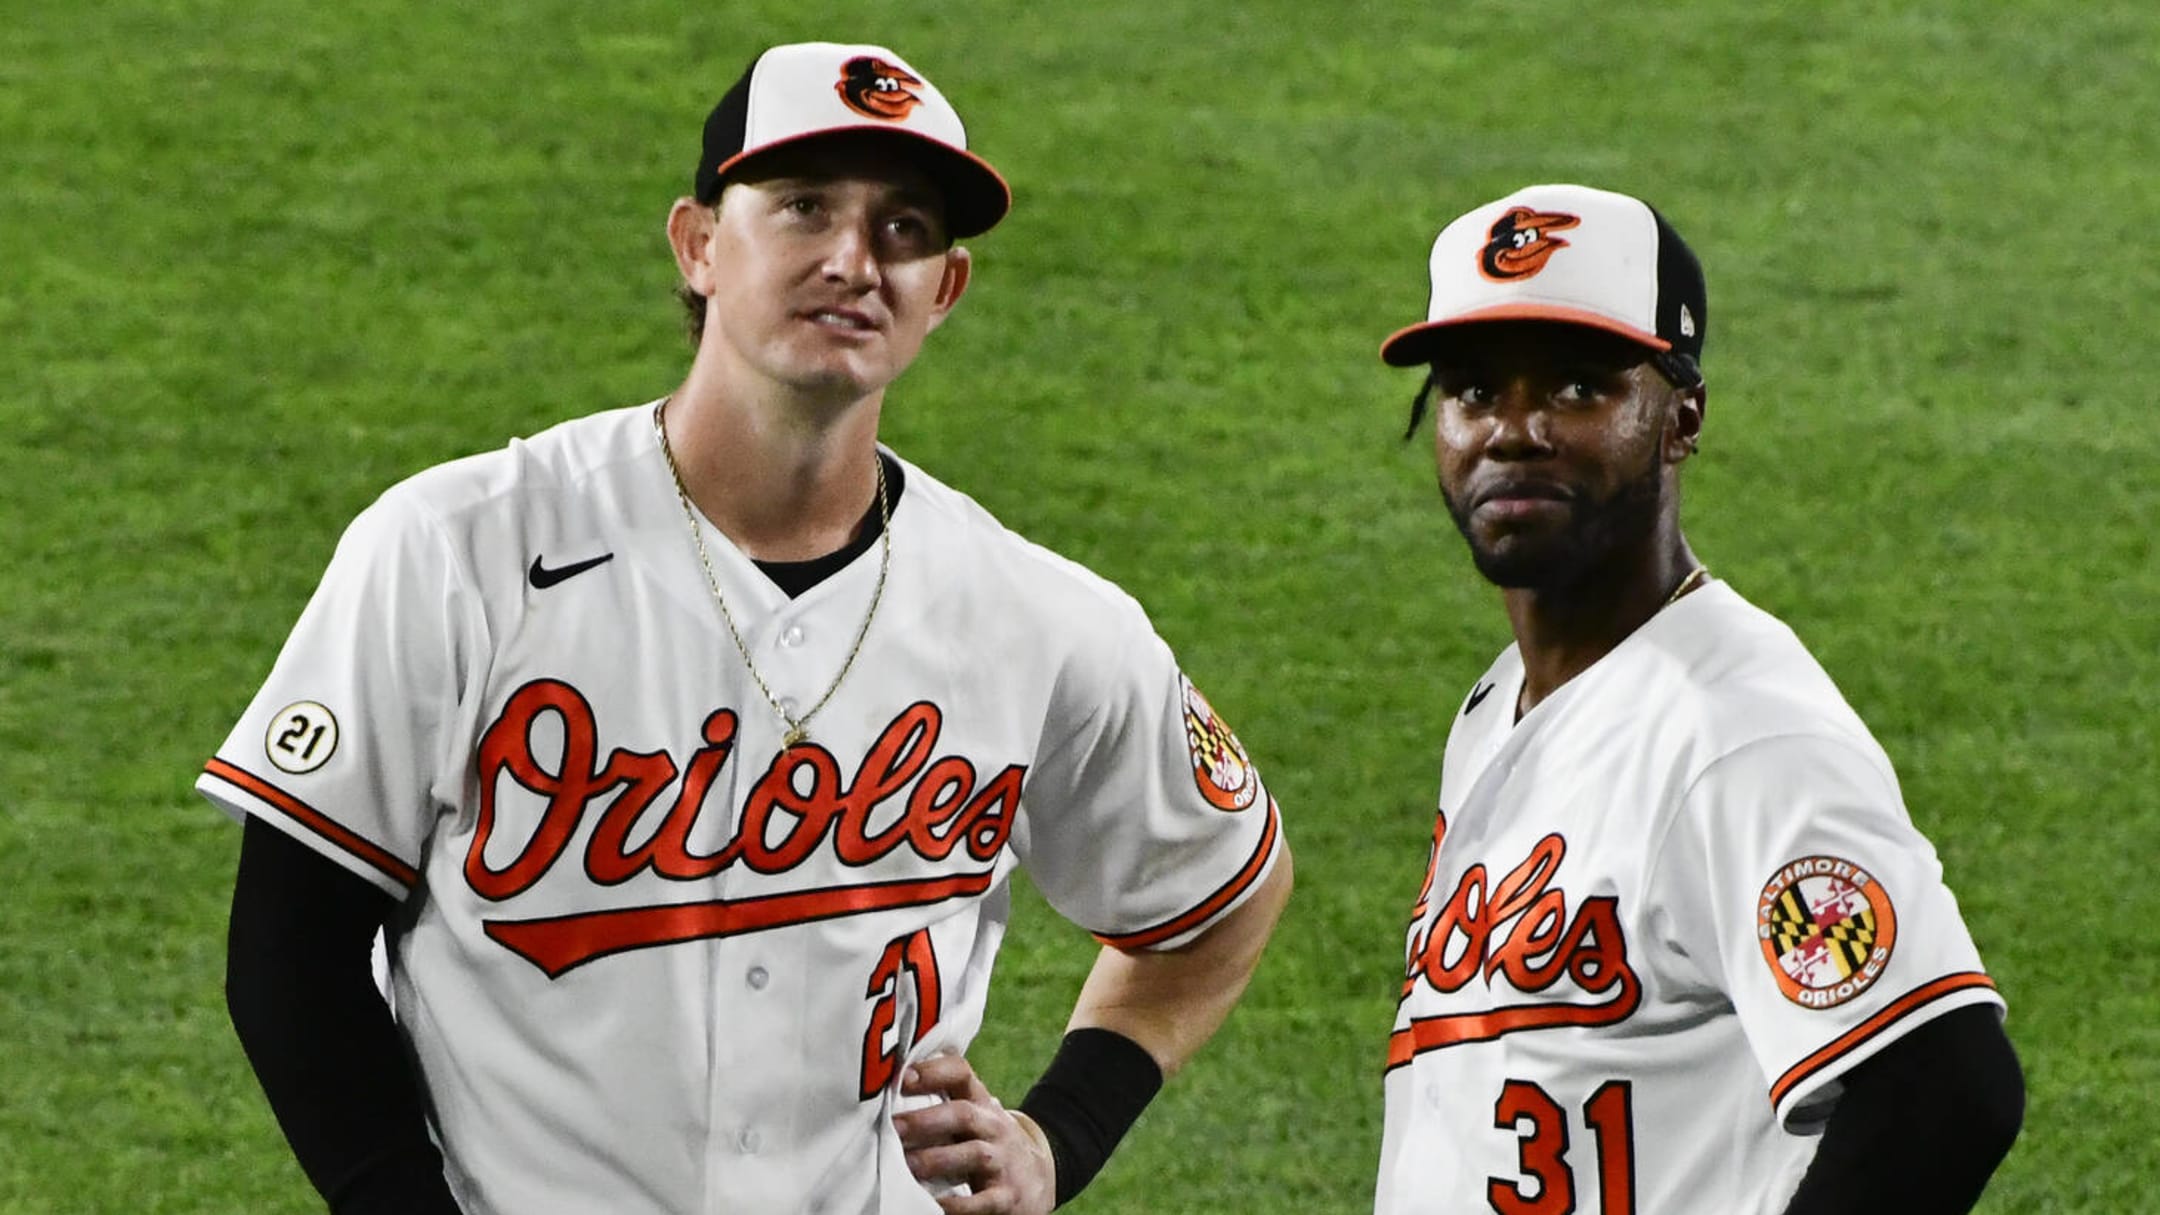 Orioles Agree to Terms with SP Moments Before MLB Lockout